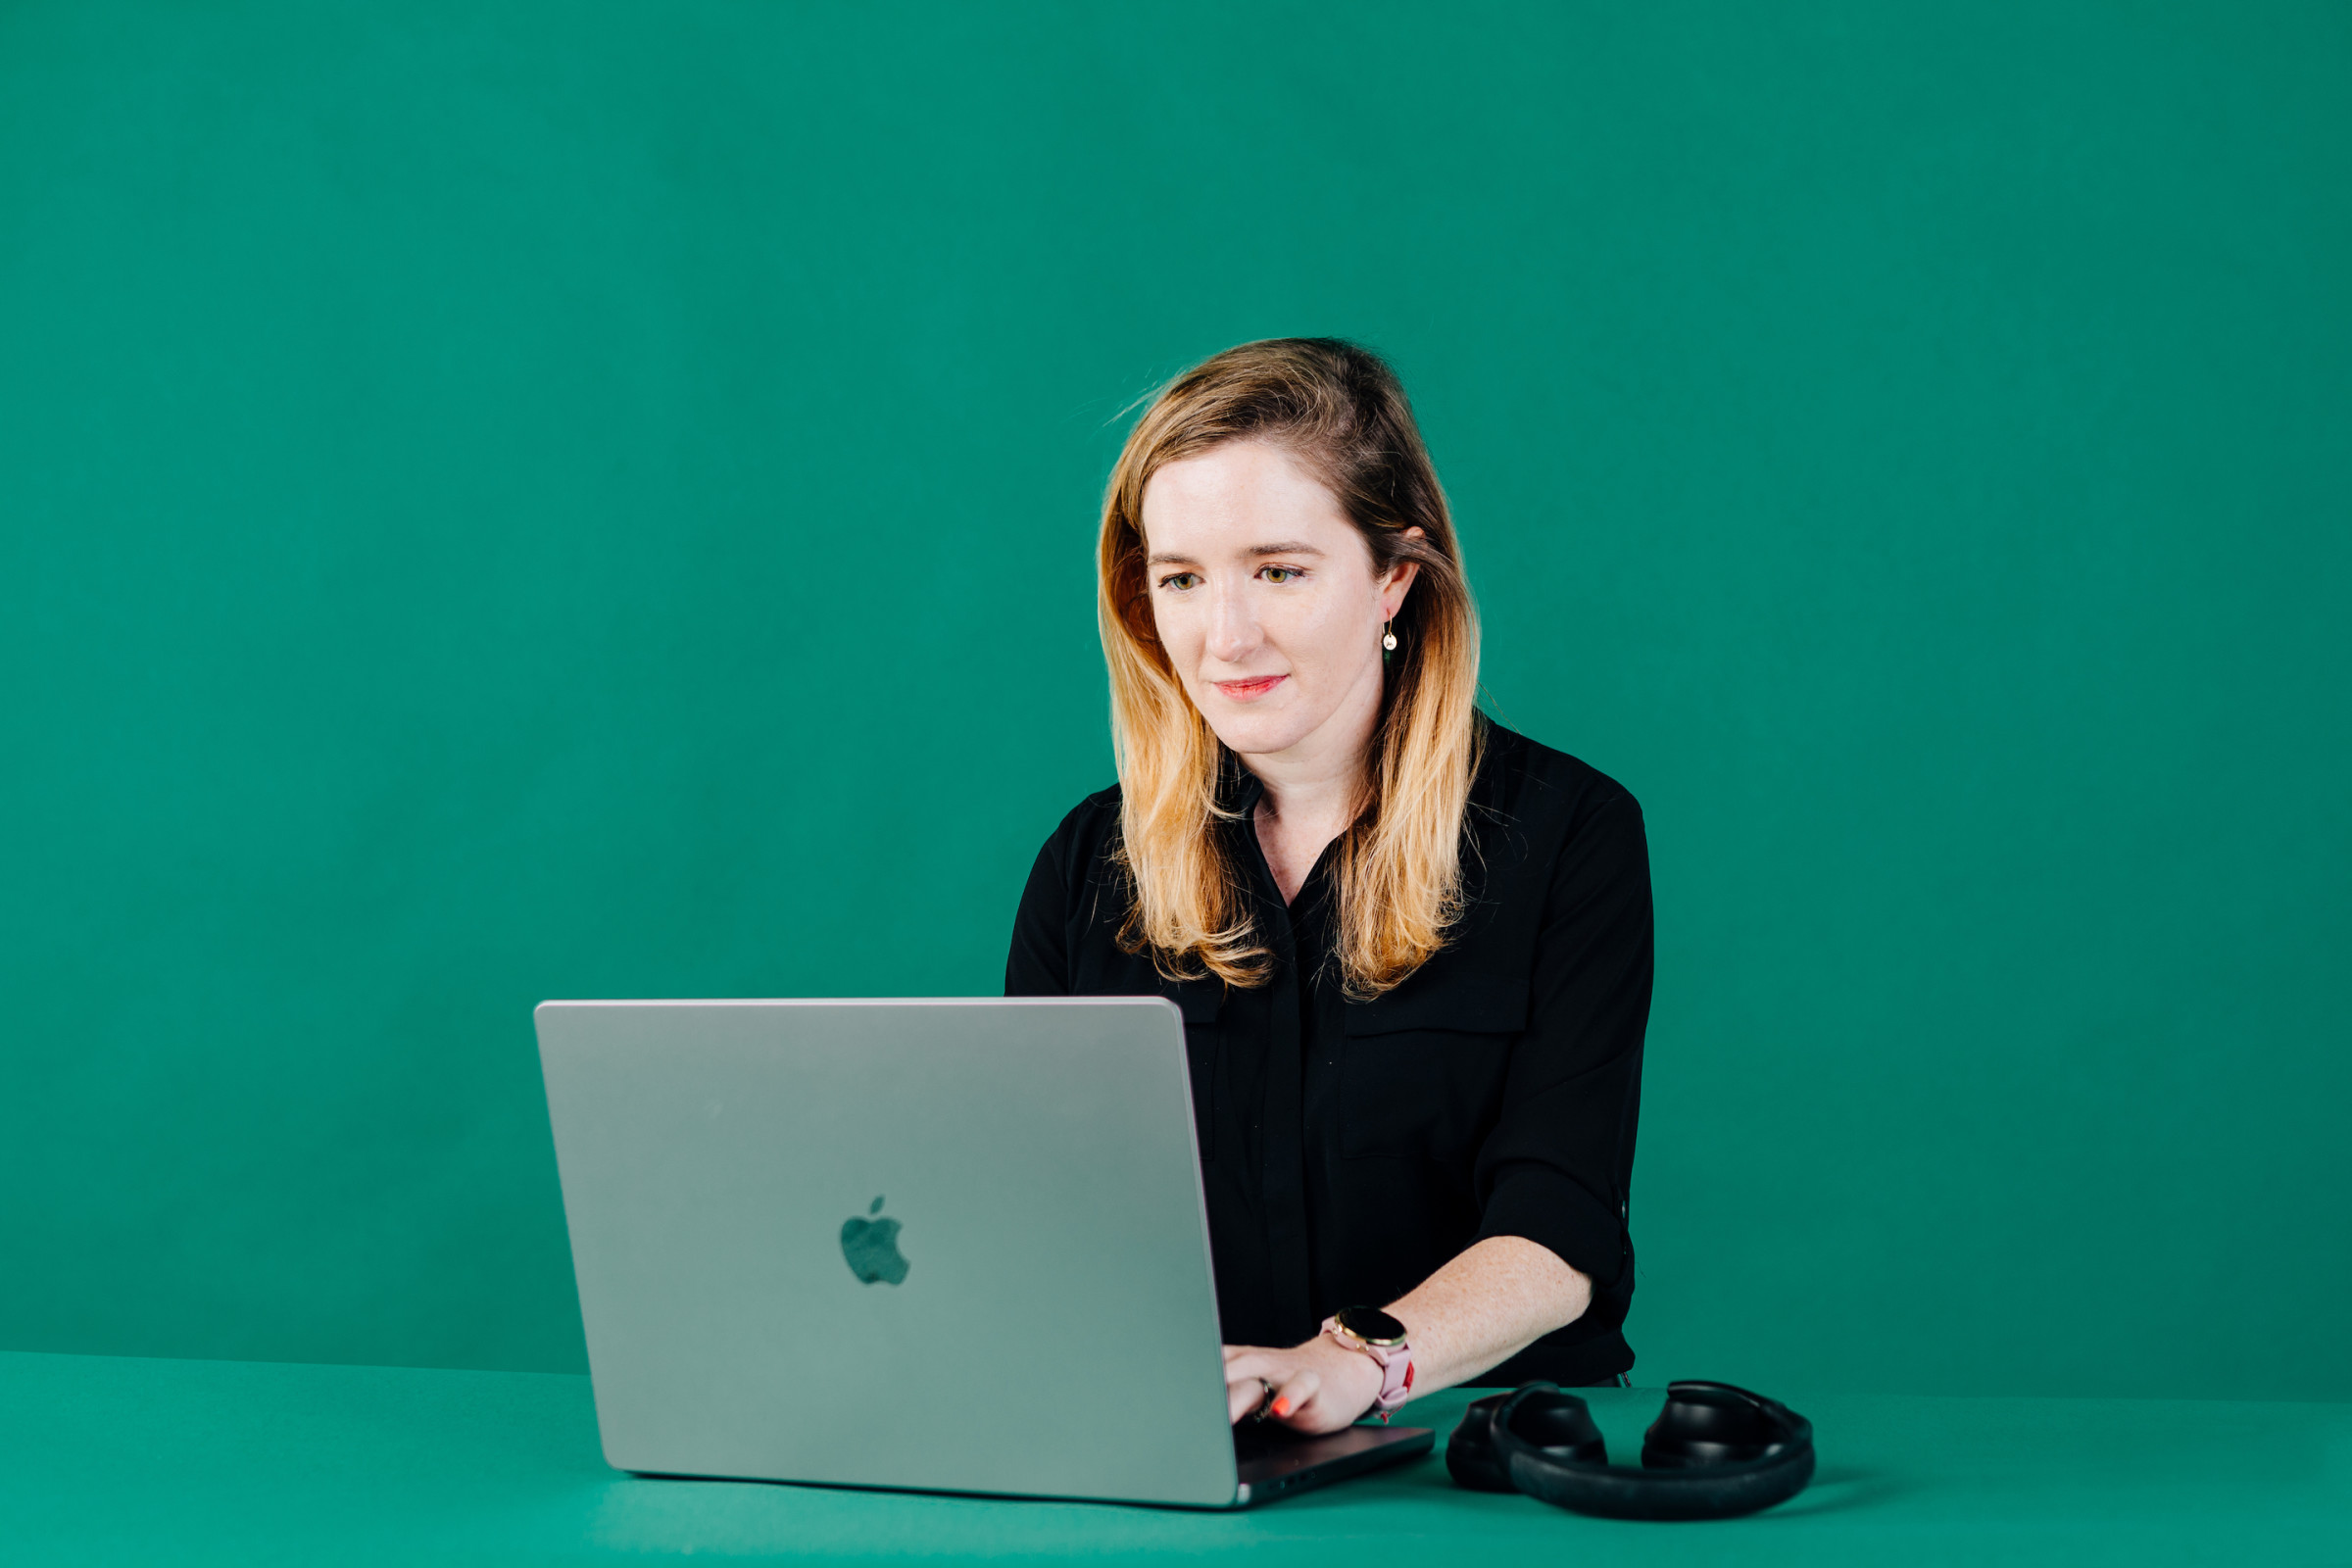 Author Keeley sitting at her laptop with her headphones against a kelly green backdrop